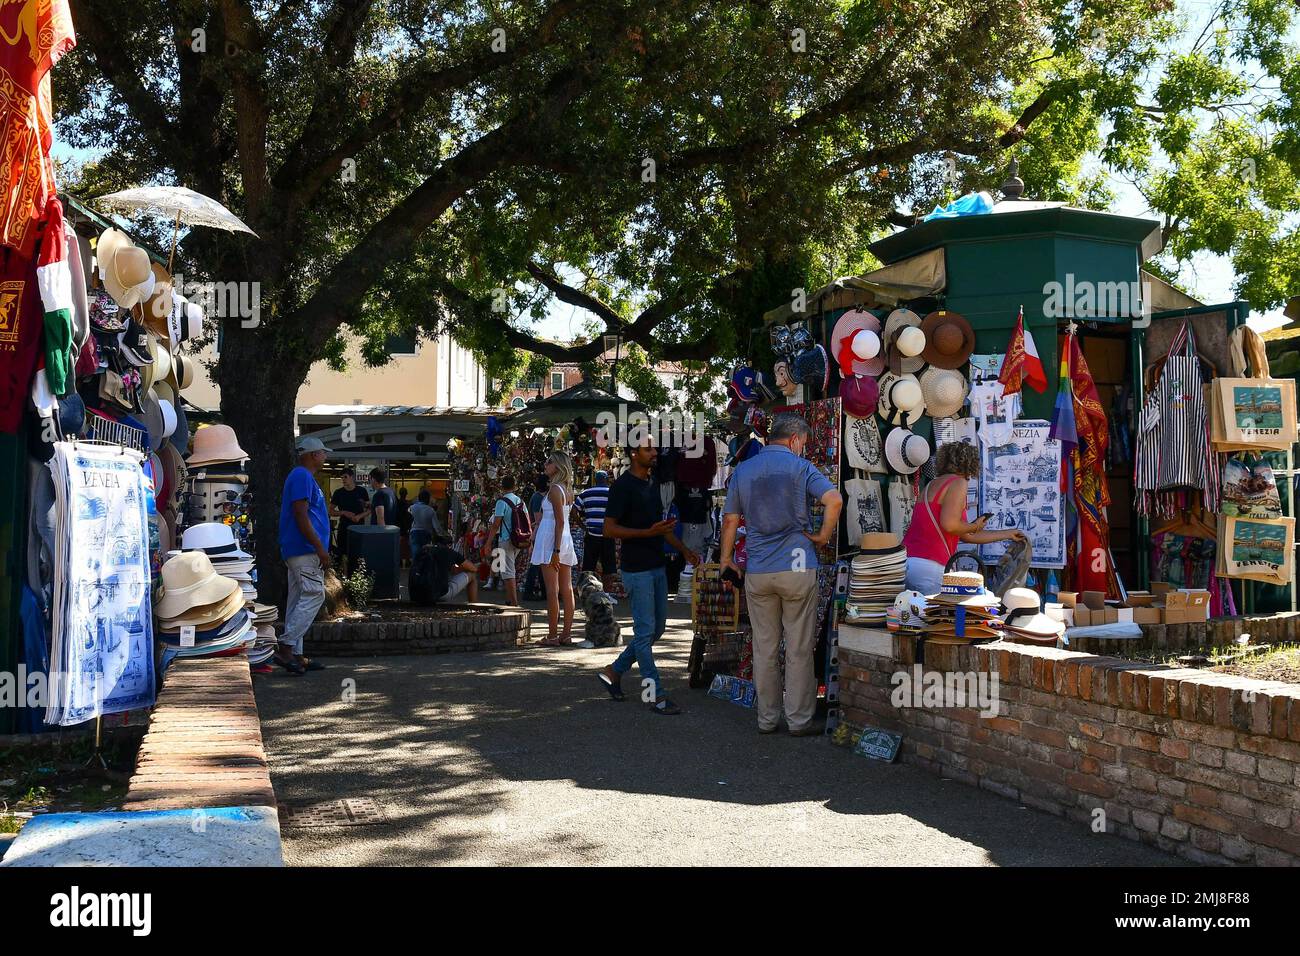 Tourists shopping souvenirs at street stalls in Piazzale Roma in summer, Venice, Veneto, Italy Stock Photo